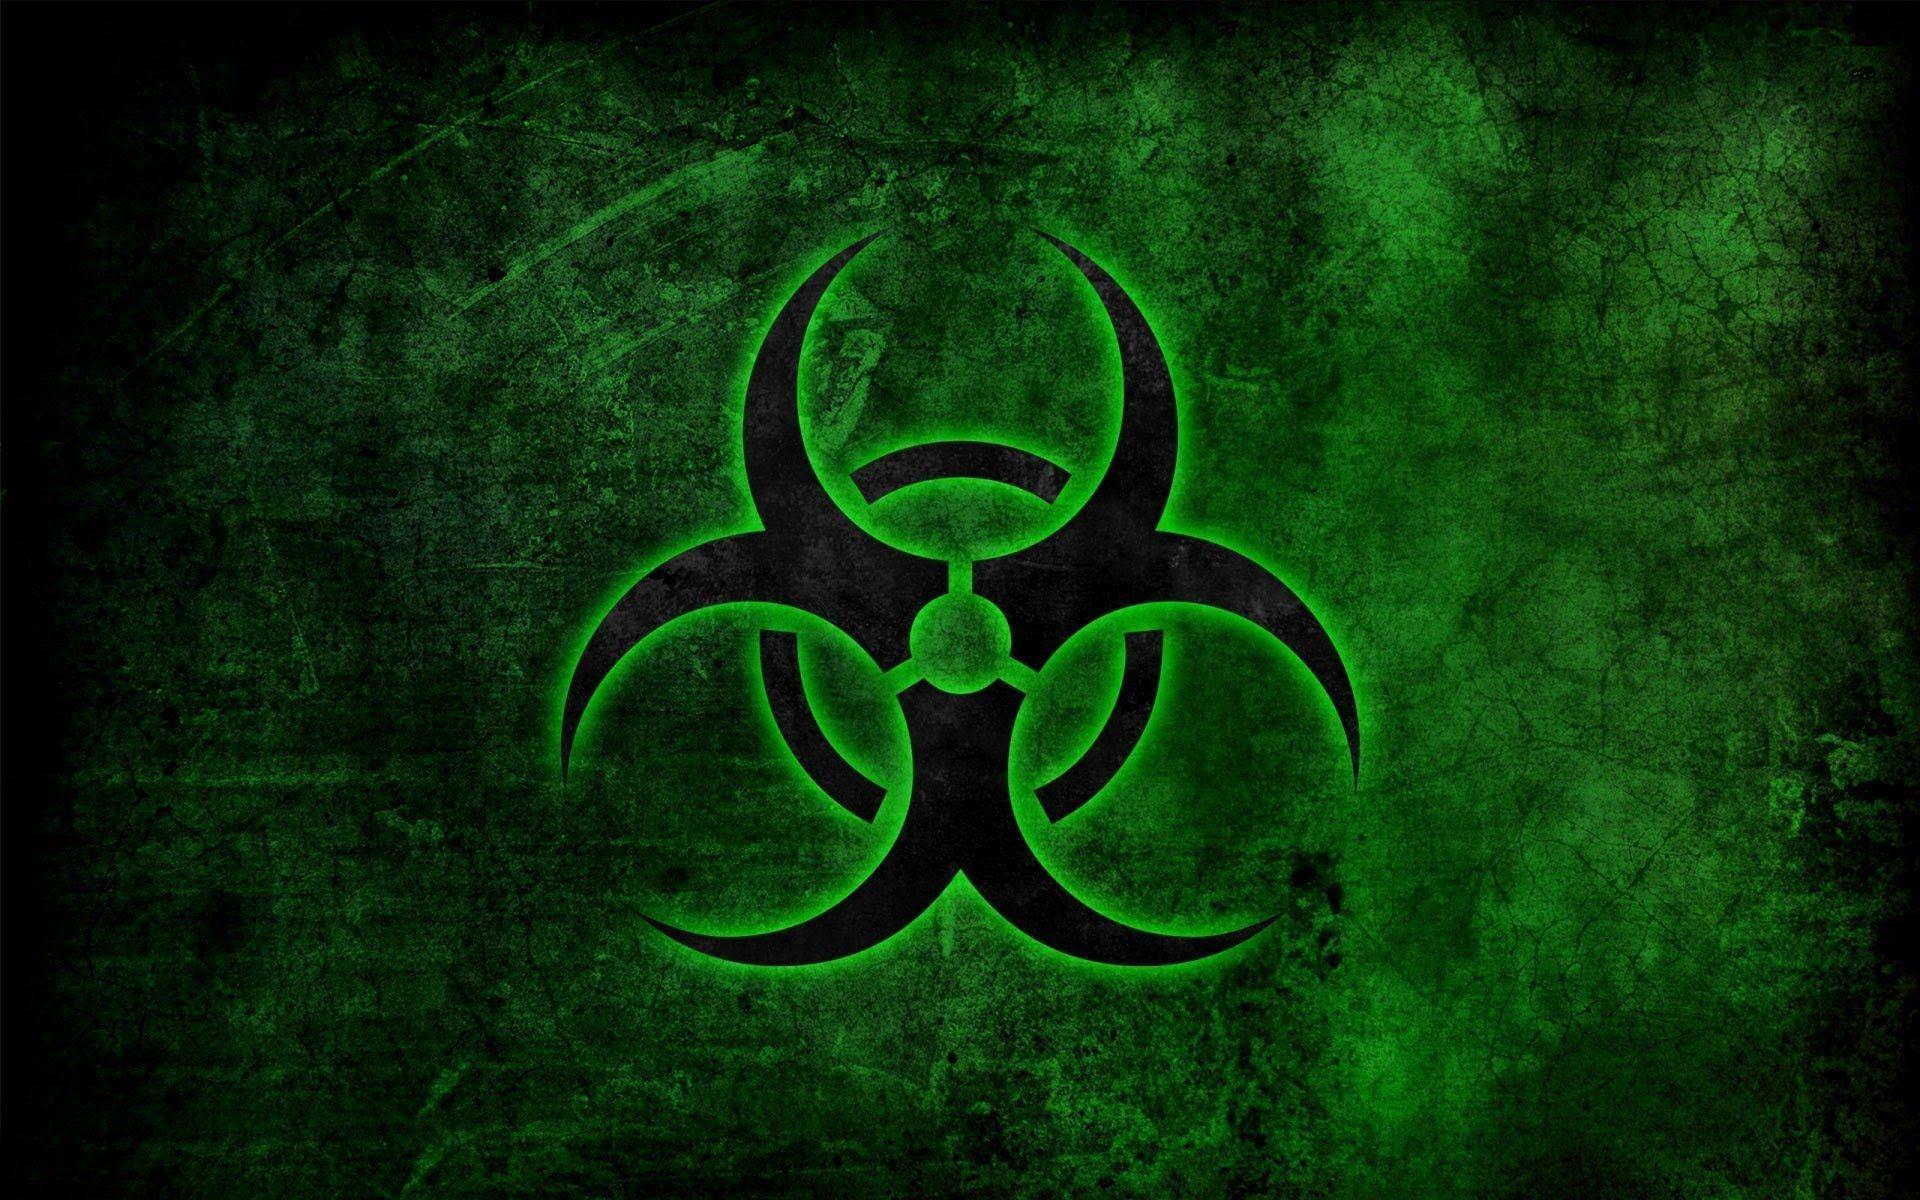 Cool Radioactive Logo - Image result for radioactive symbol | Symbols of Our Time | Symbols ...